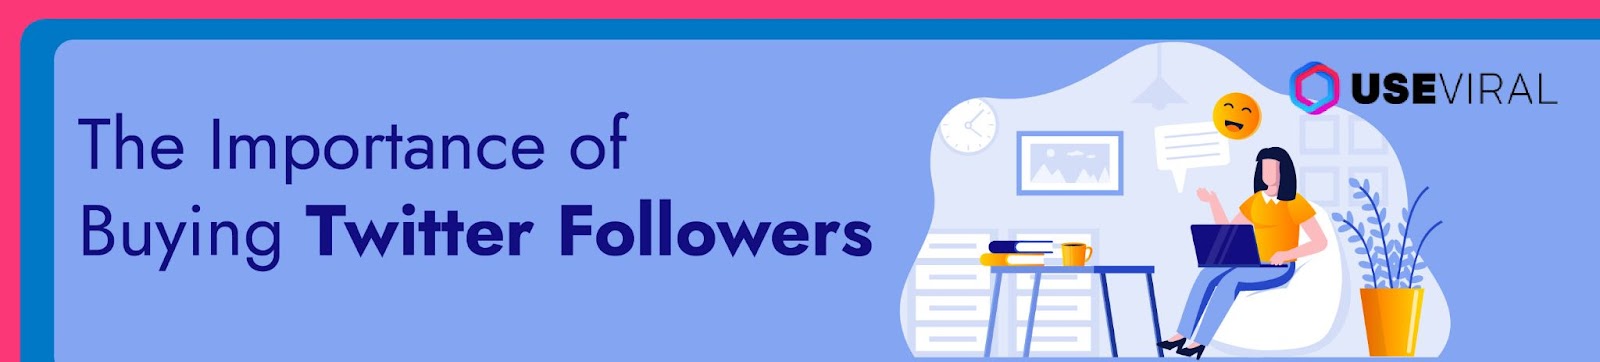 The importance to Buy Twitter Followers